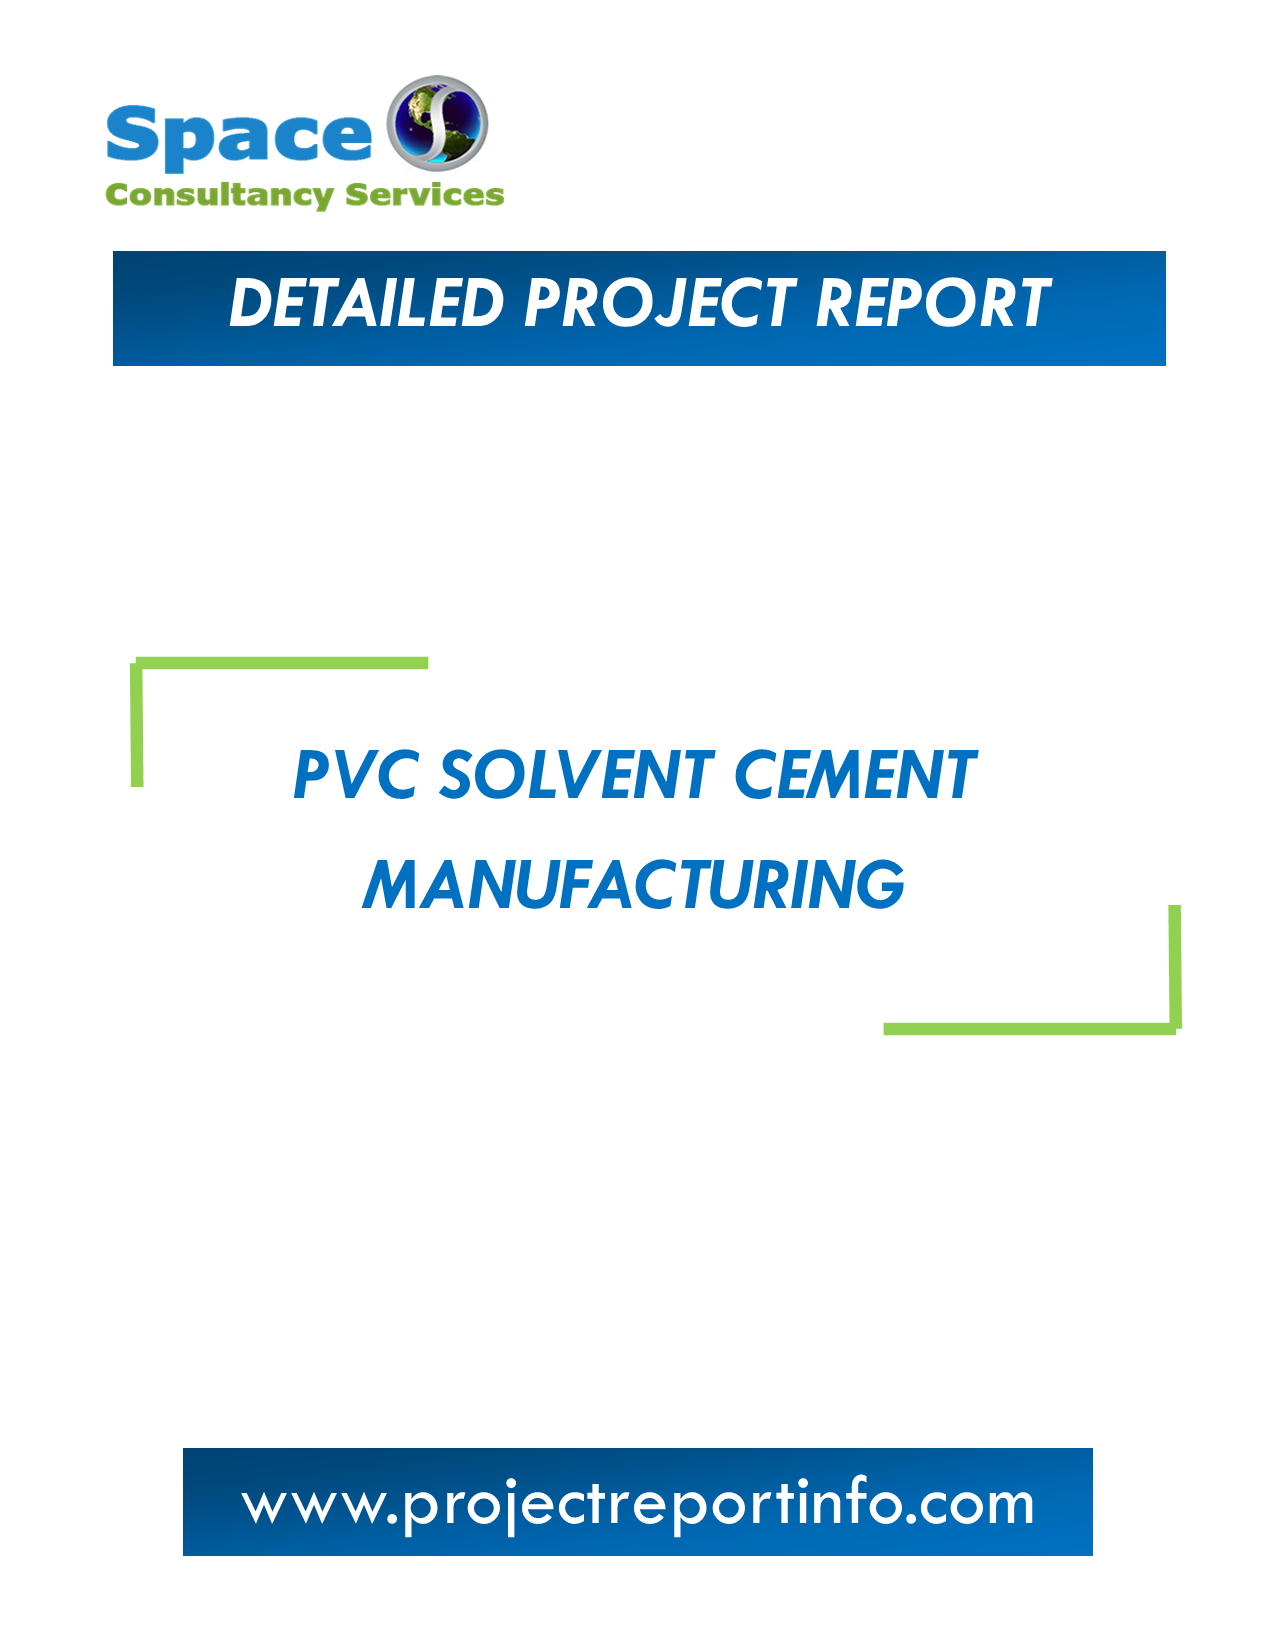 Project Report on PVC Solvent Cement Manufacturing - Space Consultancy